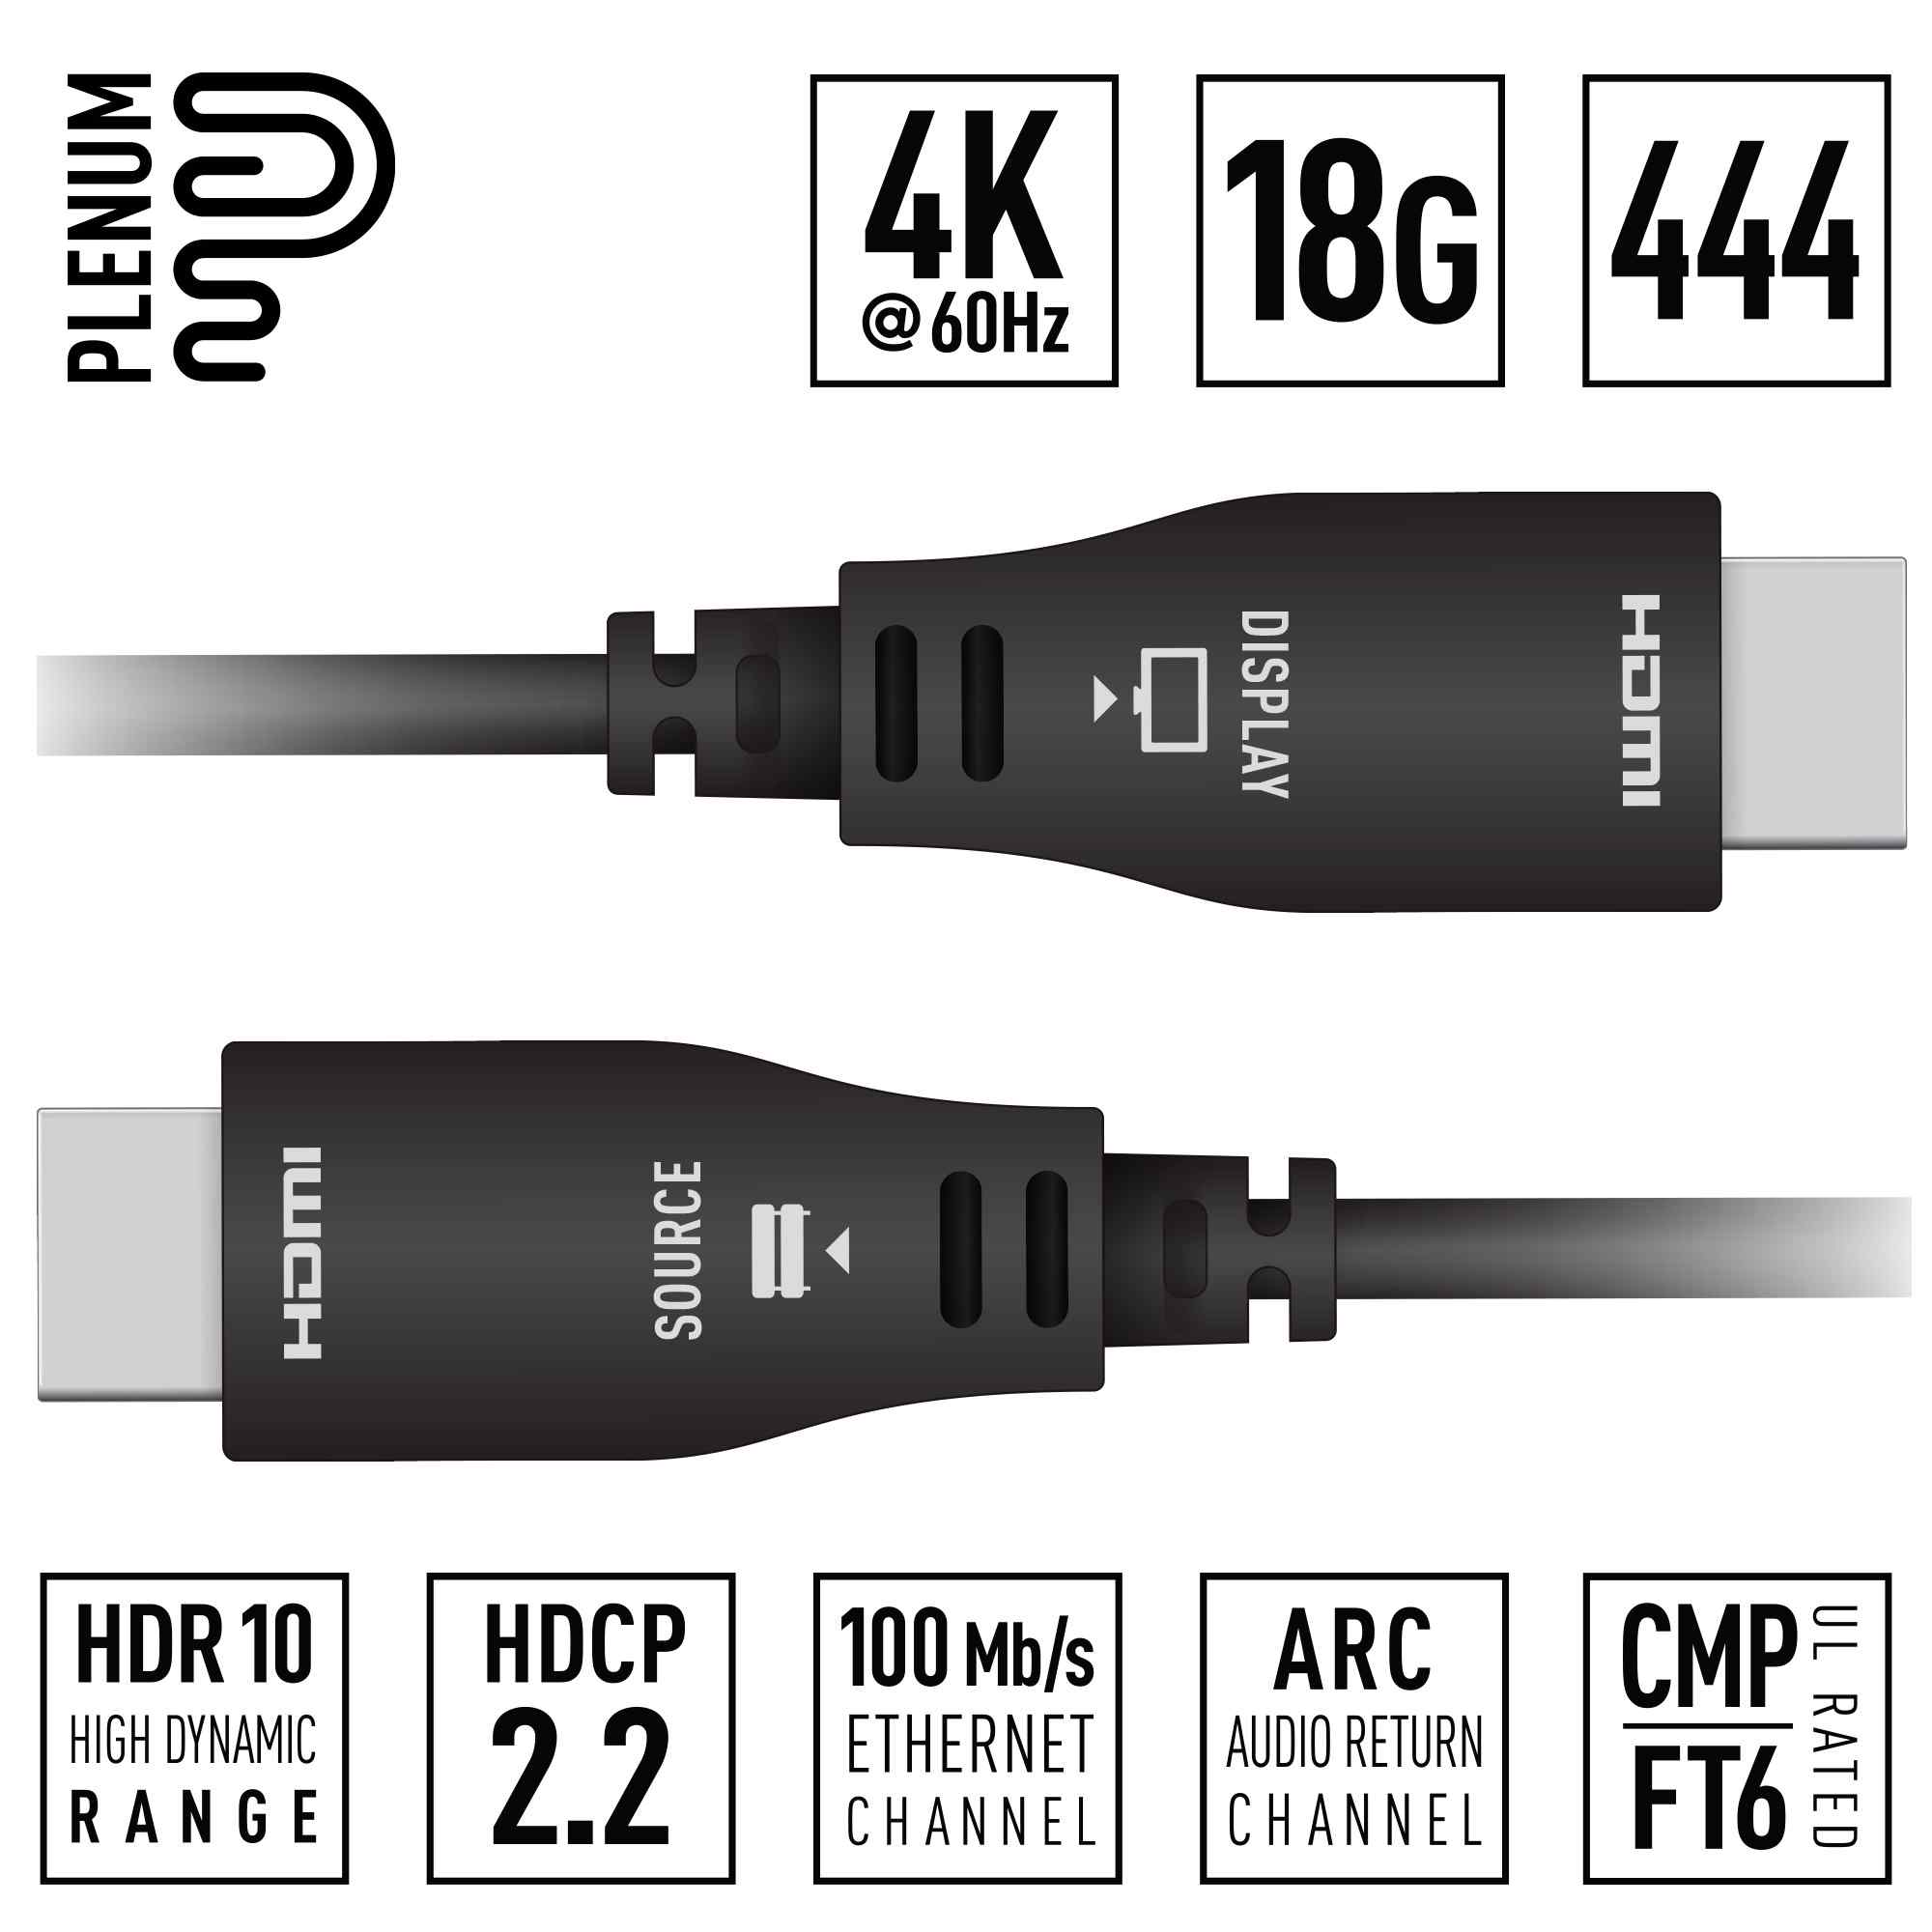 Key Digital 131FT (40M) 4K@60Hz/444/18G - Plenum Active Optical HDMI Cable, CMP/FT6 UL Rated - KD-AOCH131P